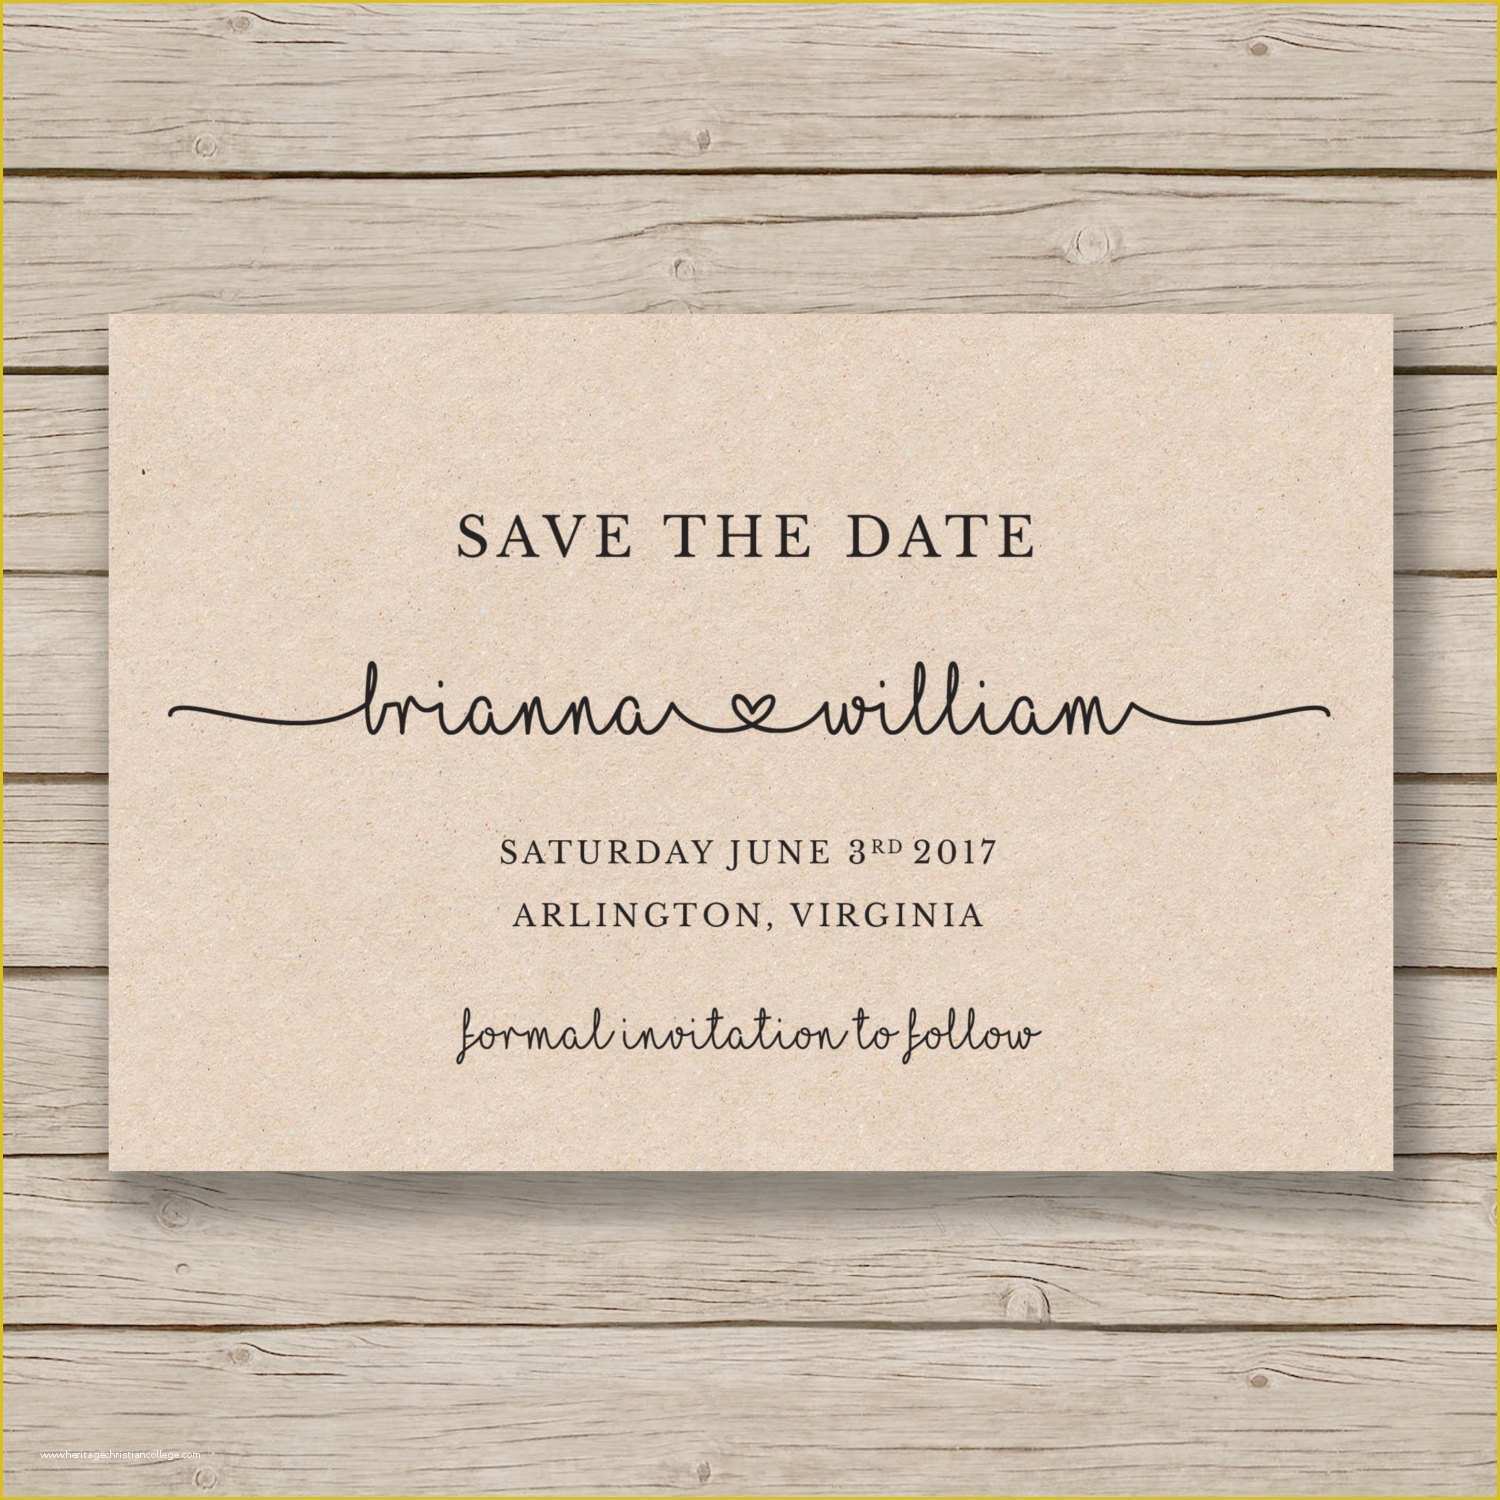 Free Printable Save the Date Invitation Templates Of Save the Date Printable Template Editable by You In Word